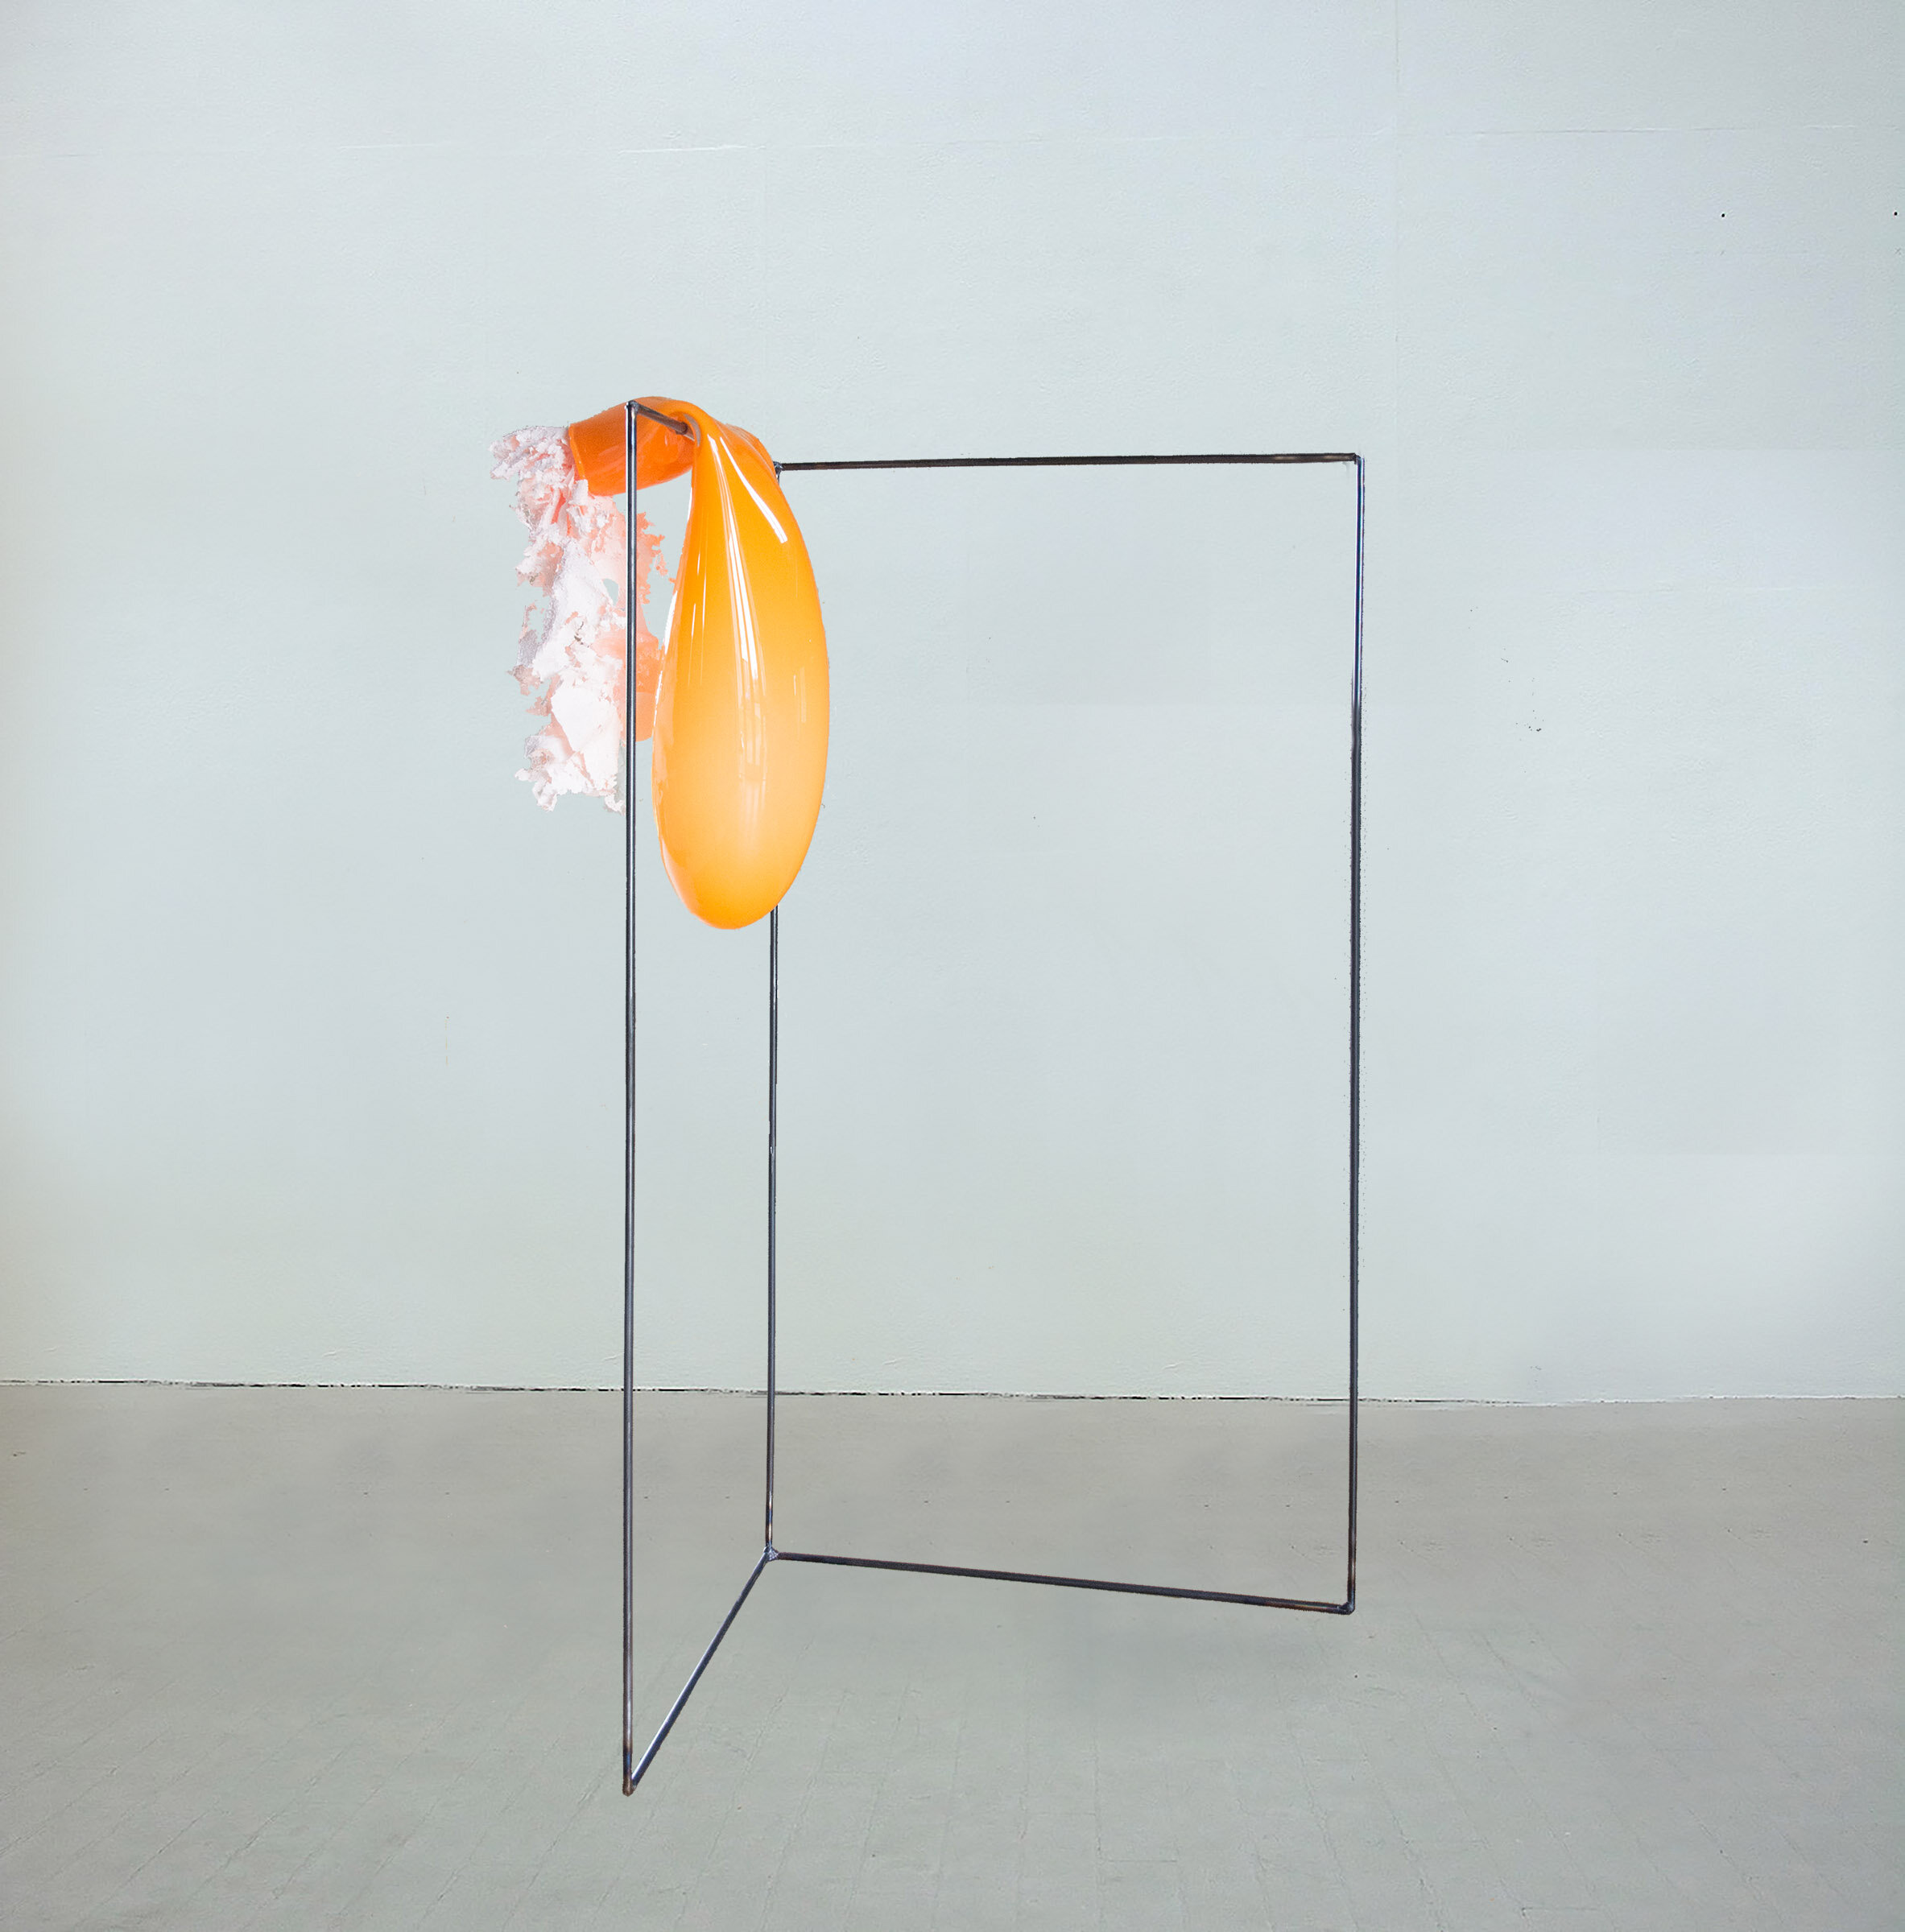  Kelly M O'Brien,  Good Time to Be an Introvert . Steel, glass, paper. 138 x 72 x 58 cm ©2020 